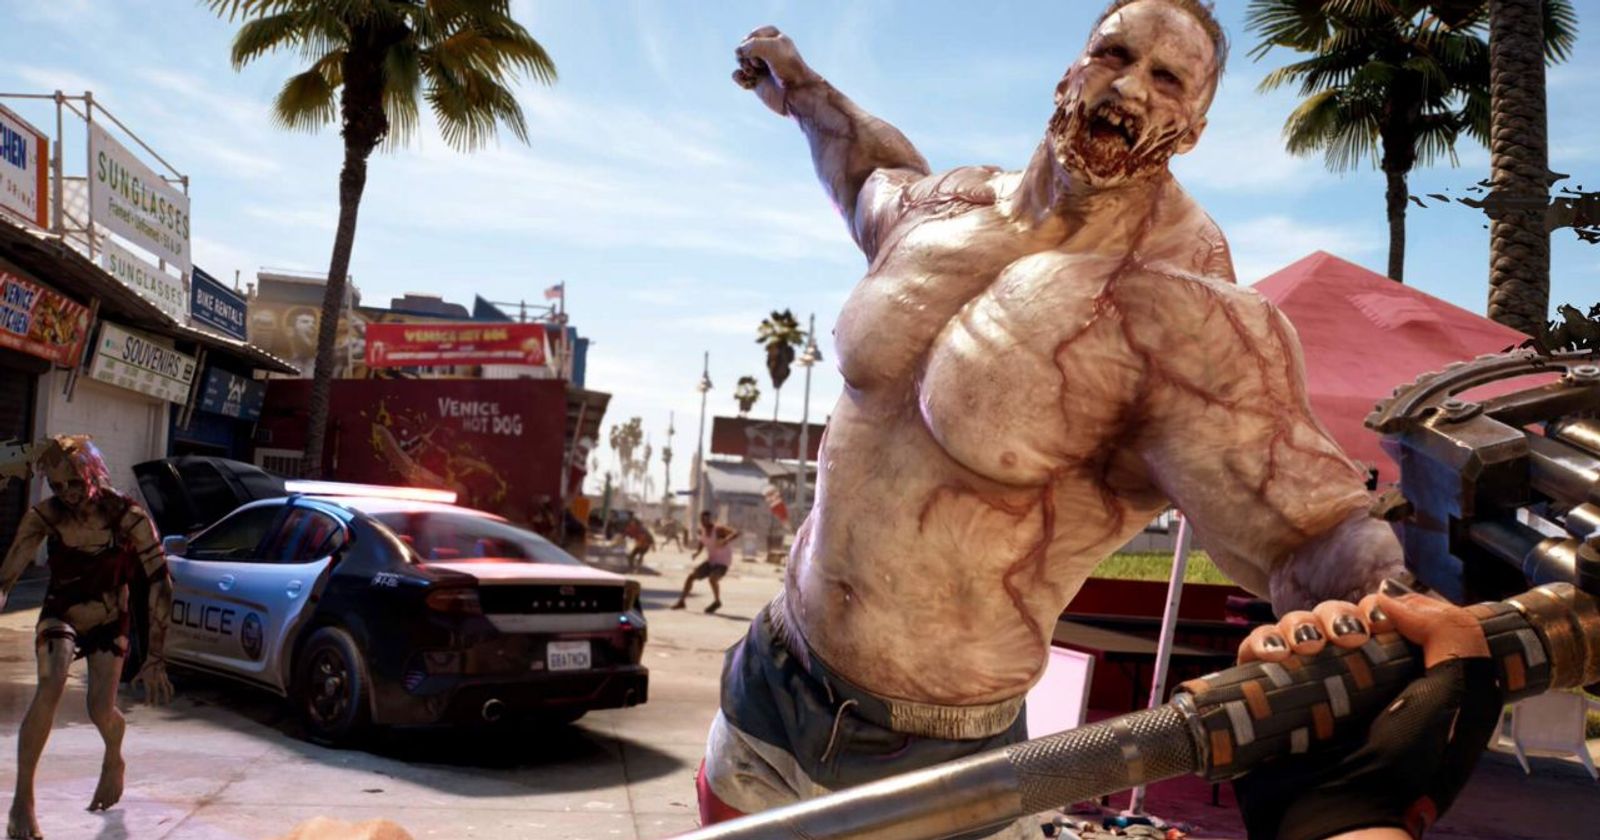 Is Dead Island 2 going to offer cross platform support